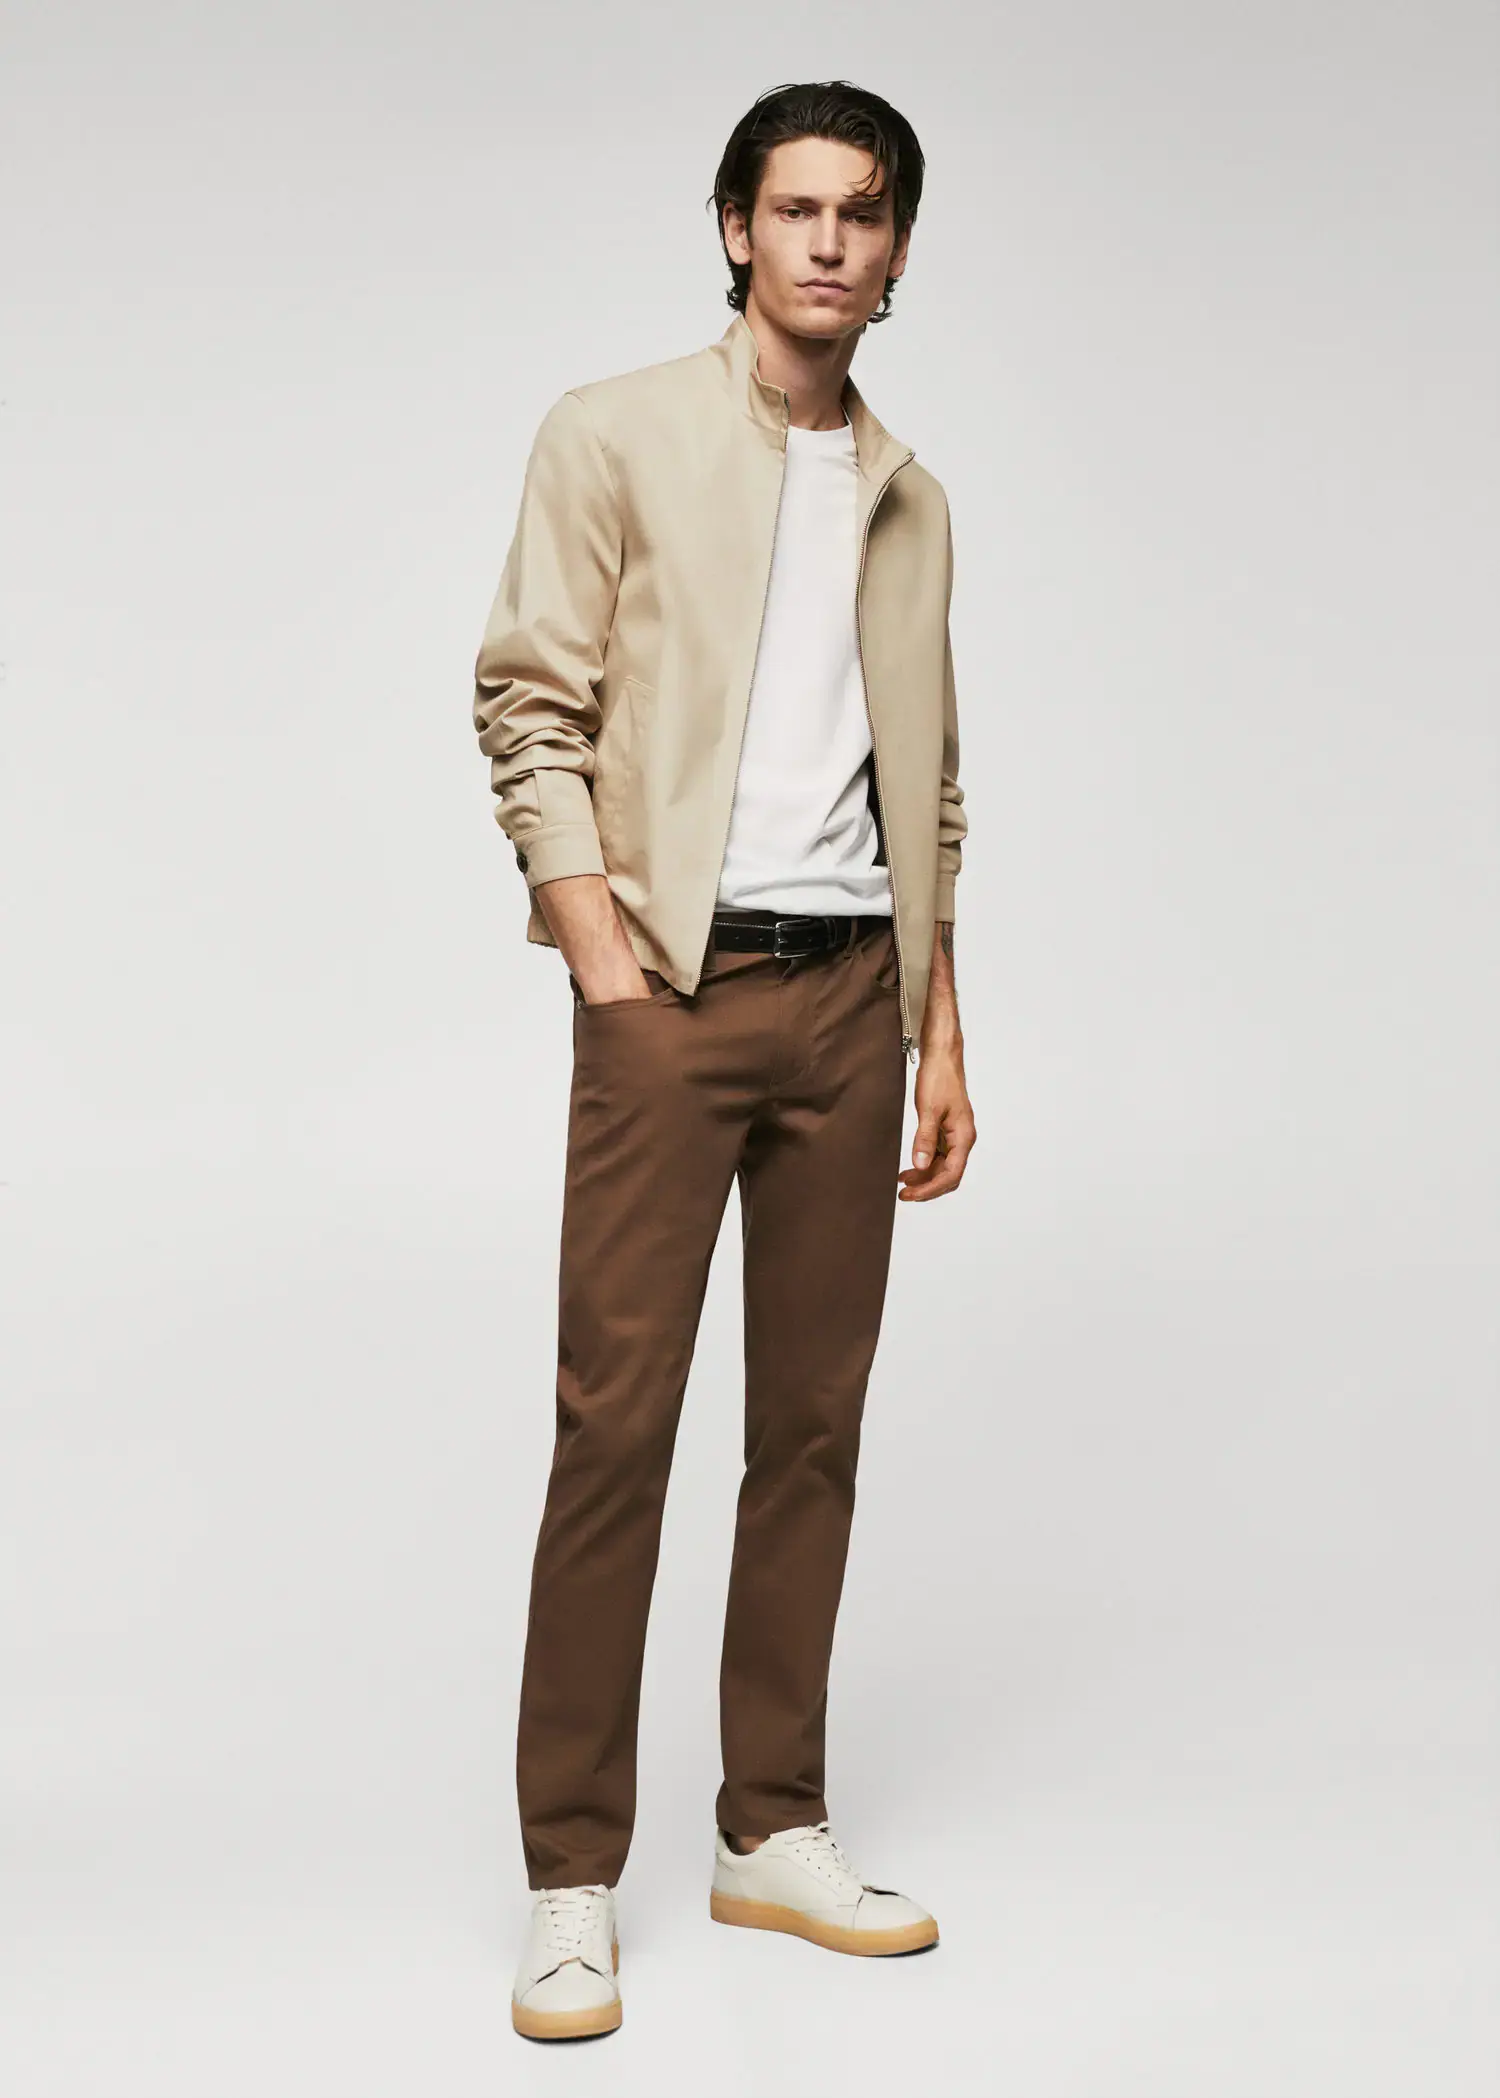 Mango 100% cotton bomber jacket. a man in a tan jacket and brown pants. 